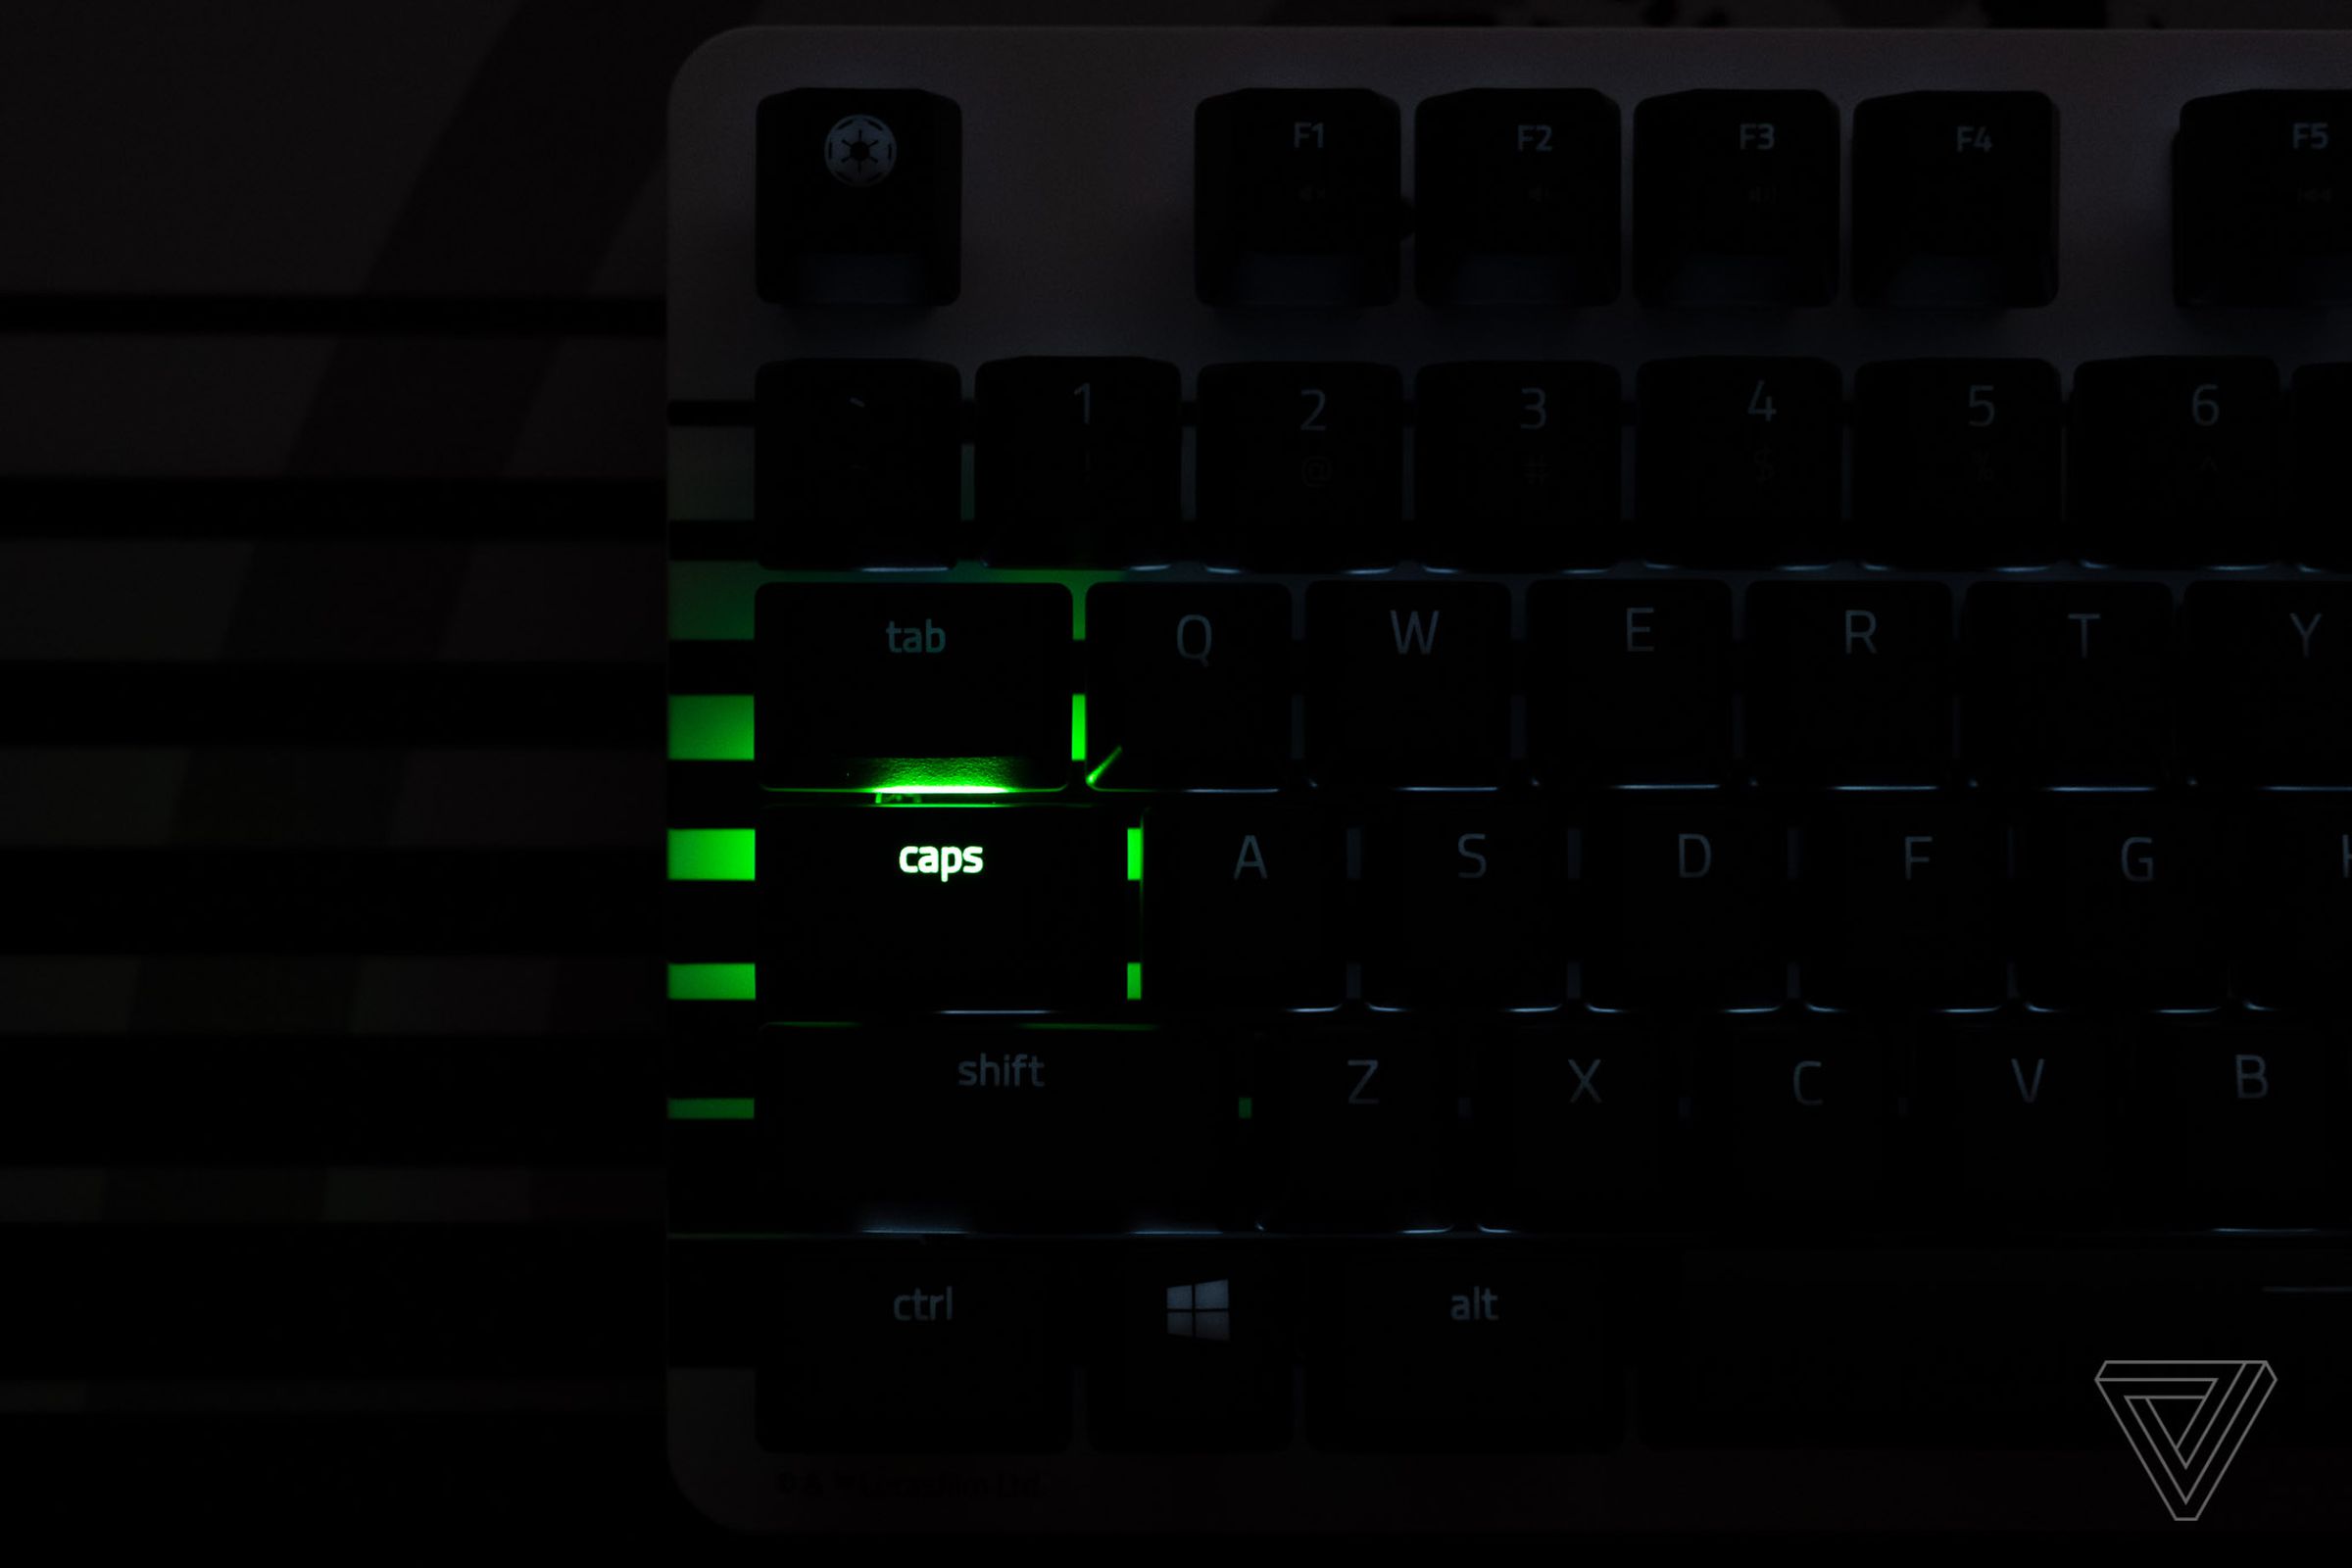 The only bit of color that Razer indulges in is for the Caps Lock key activation, lit up in its signature green.